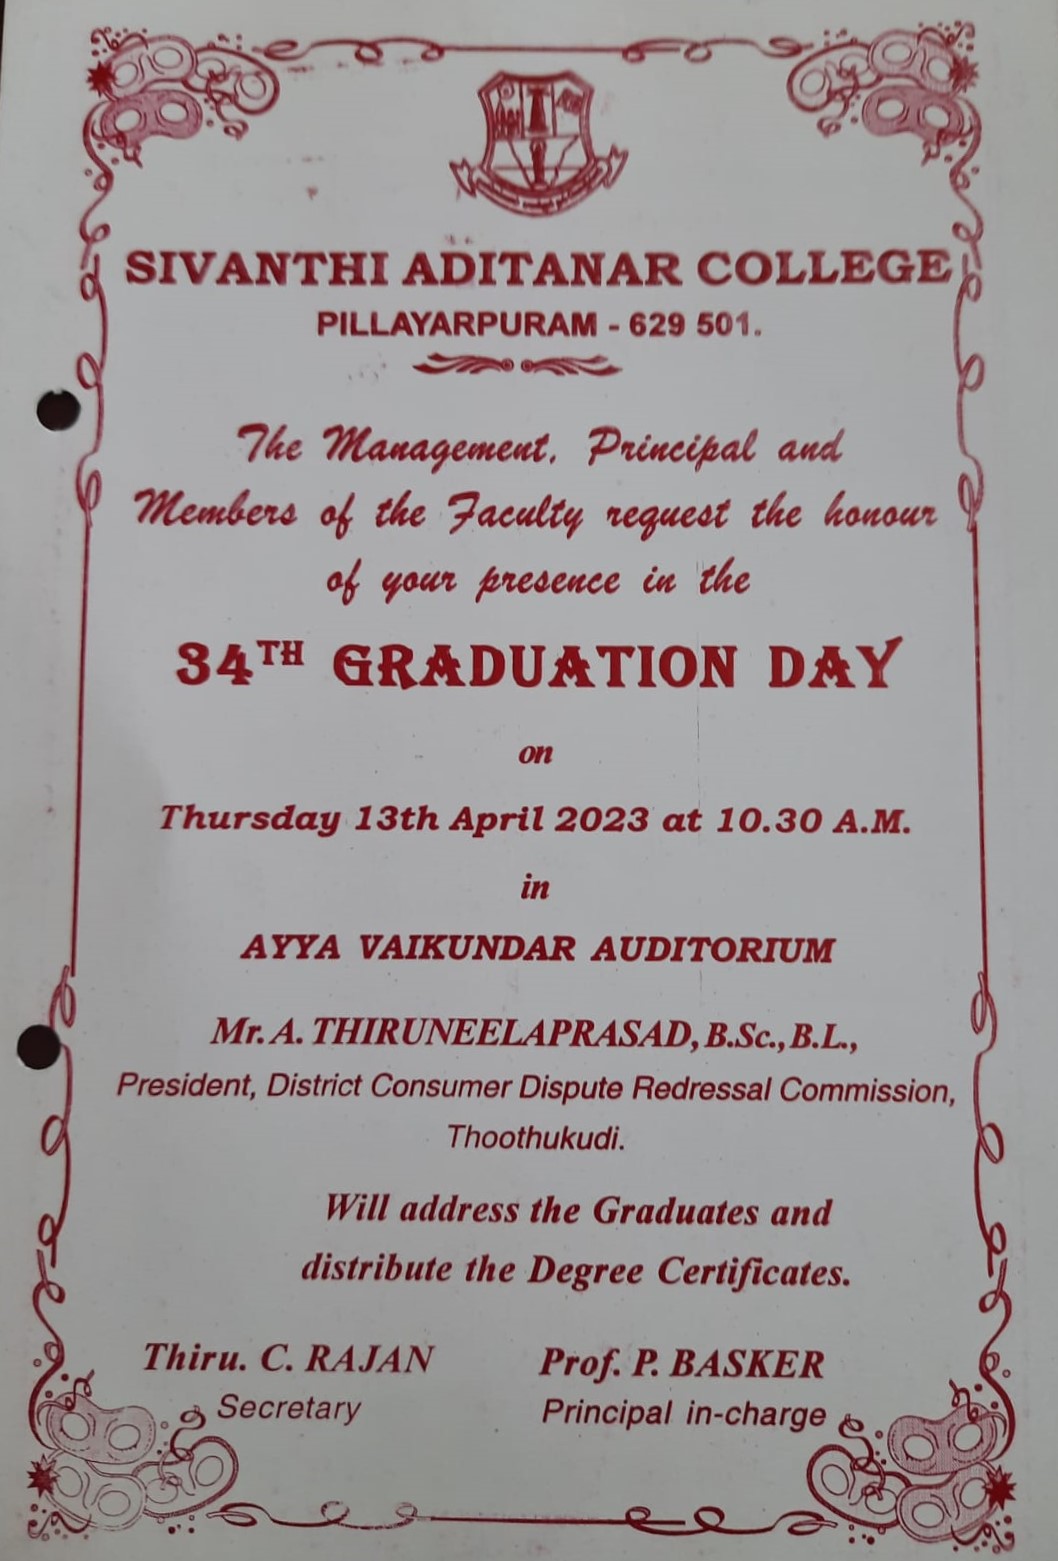 34th Graduation Day on 13th April 2023